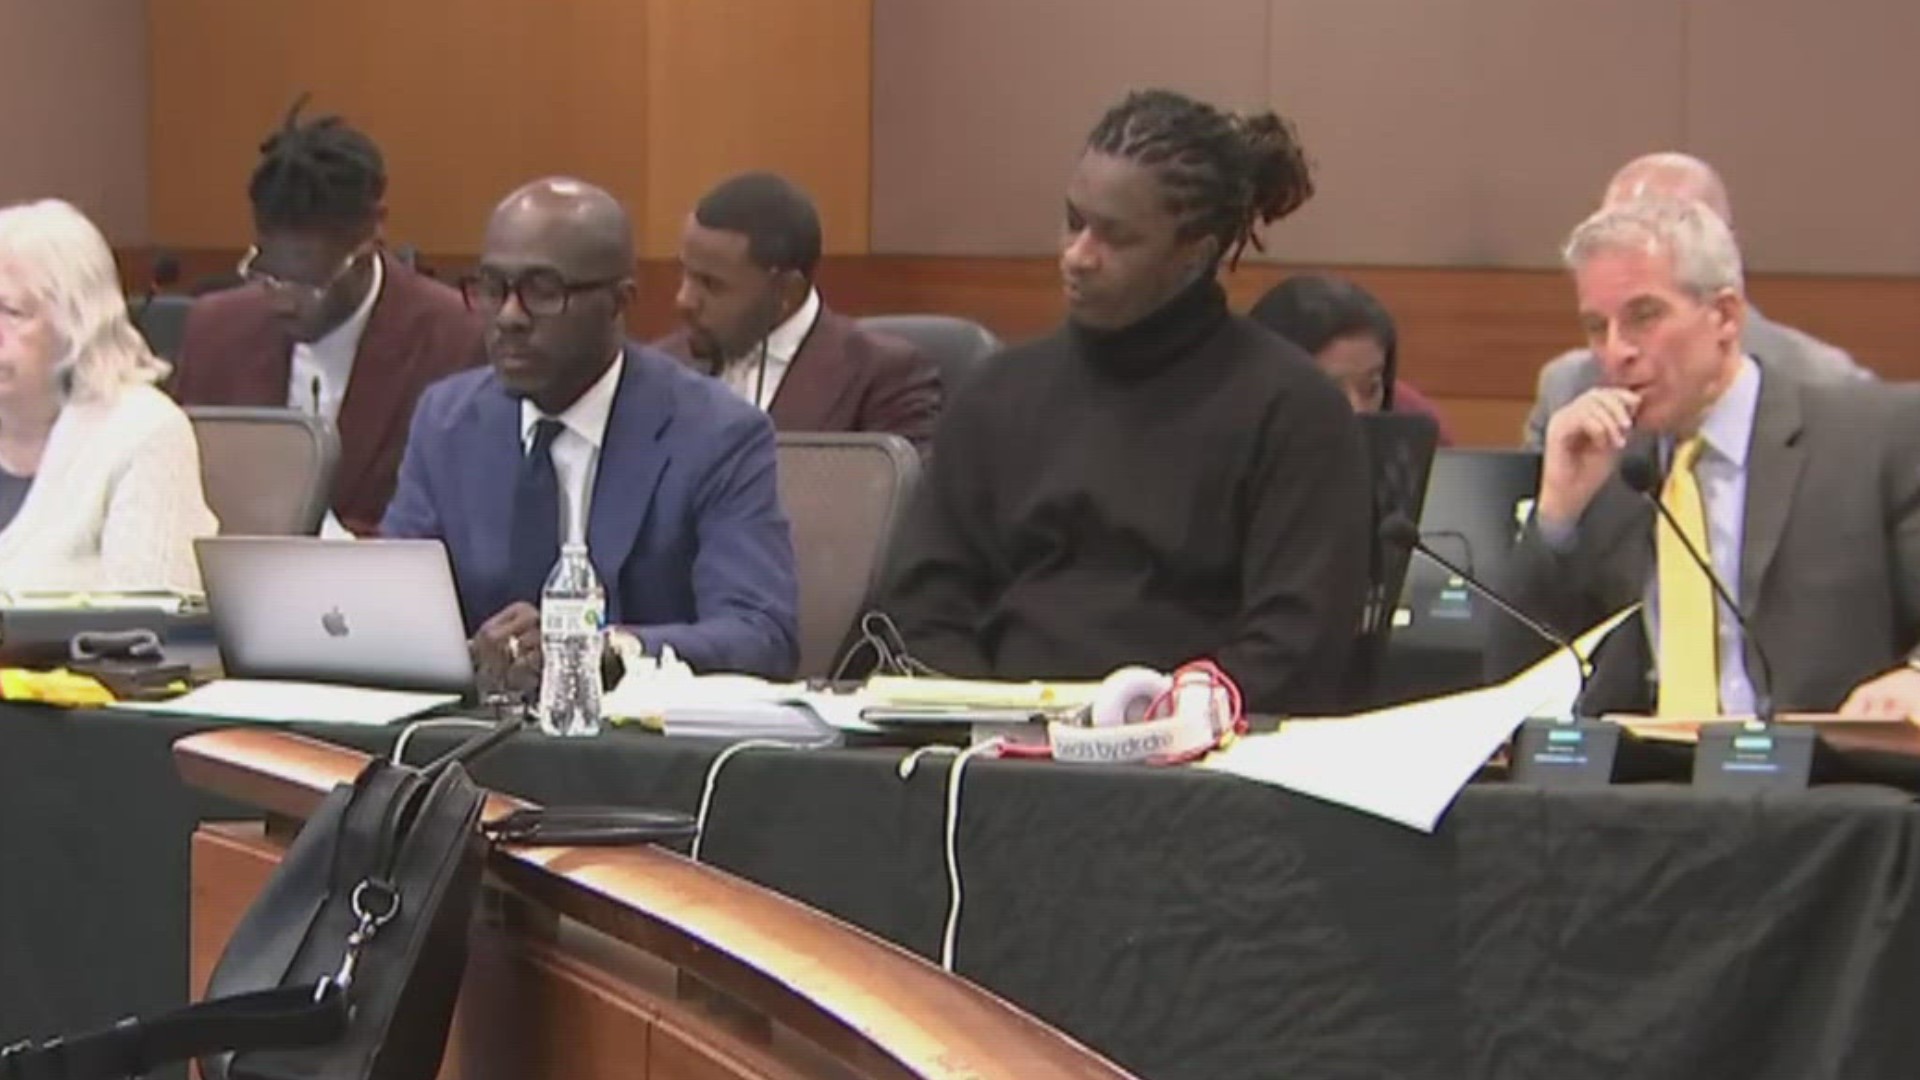 The racketeering conspiracy trial for rapper Young Thug and five others began last month after about 10 months of jury selection.